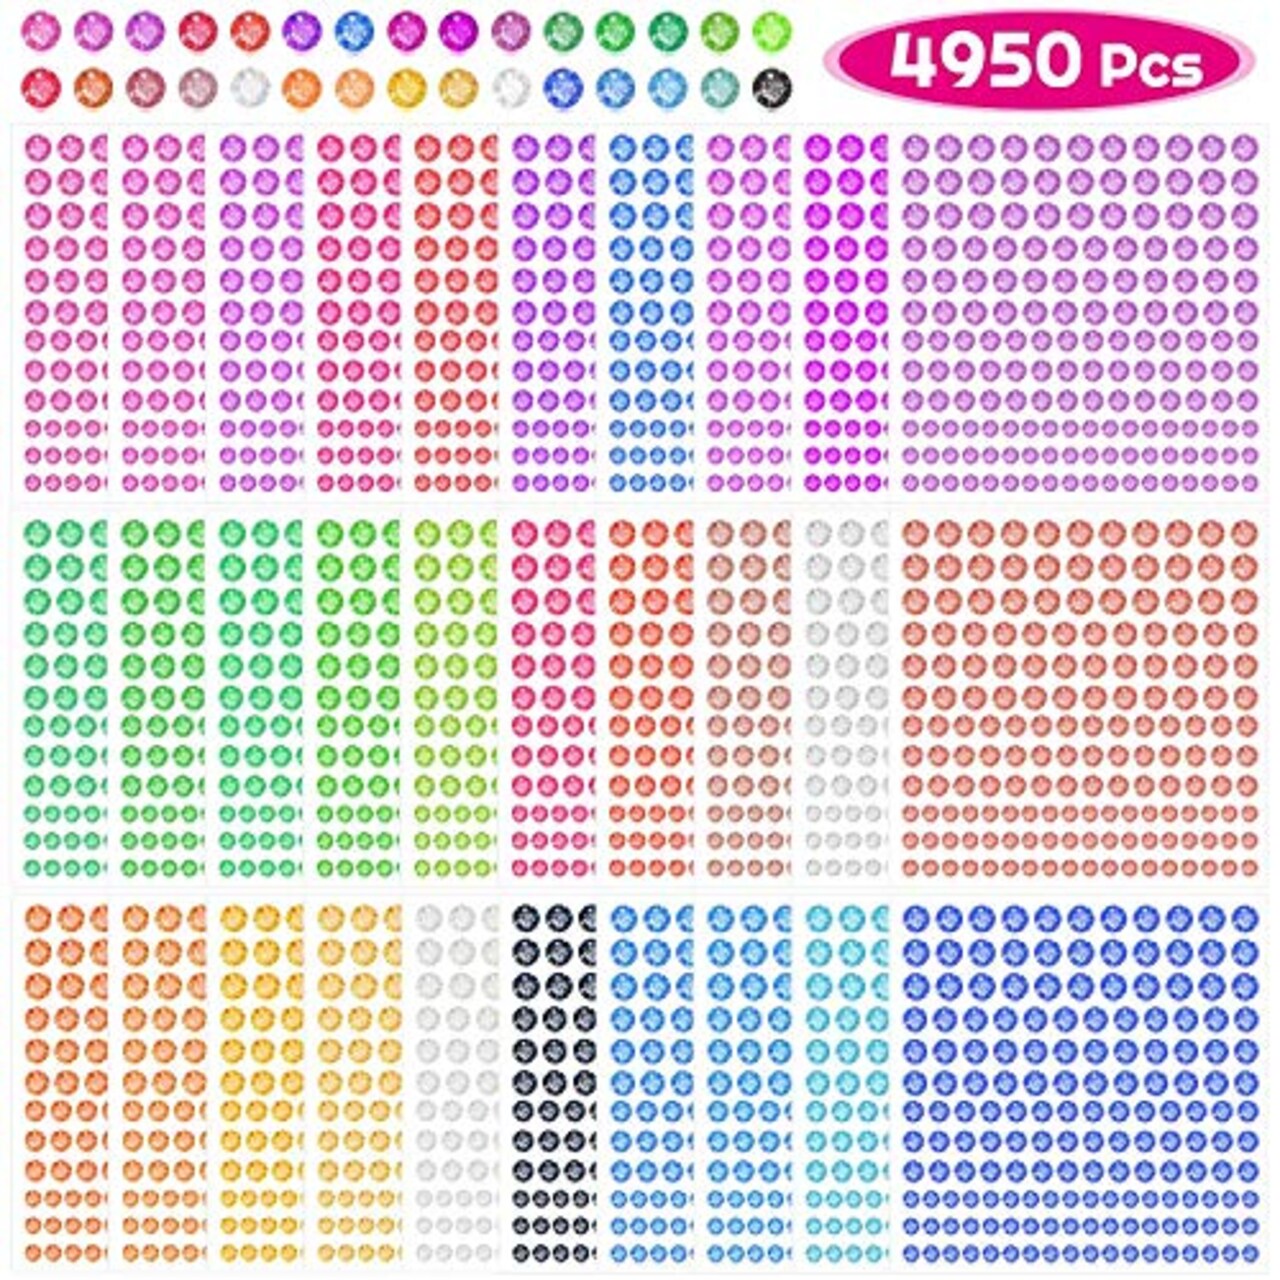 Rhinestone Stickers, Anezus 4950pcs Adhesive Stick on Gems Face Jewels  Stickers Self Adhesive Rhinestones for Crafts, Makeup and Decorations (30  Colors, 4 Sizes)